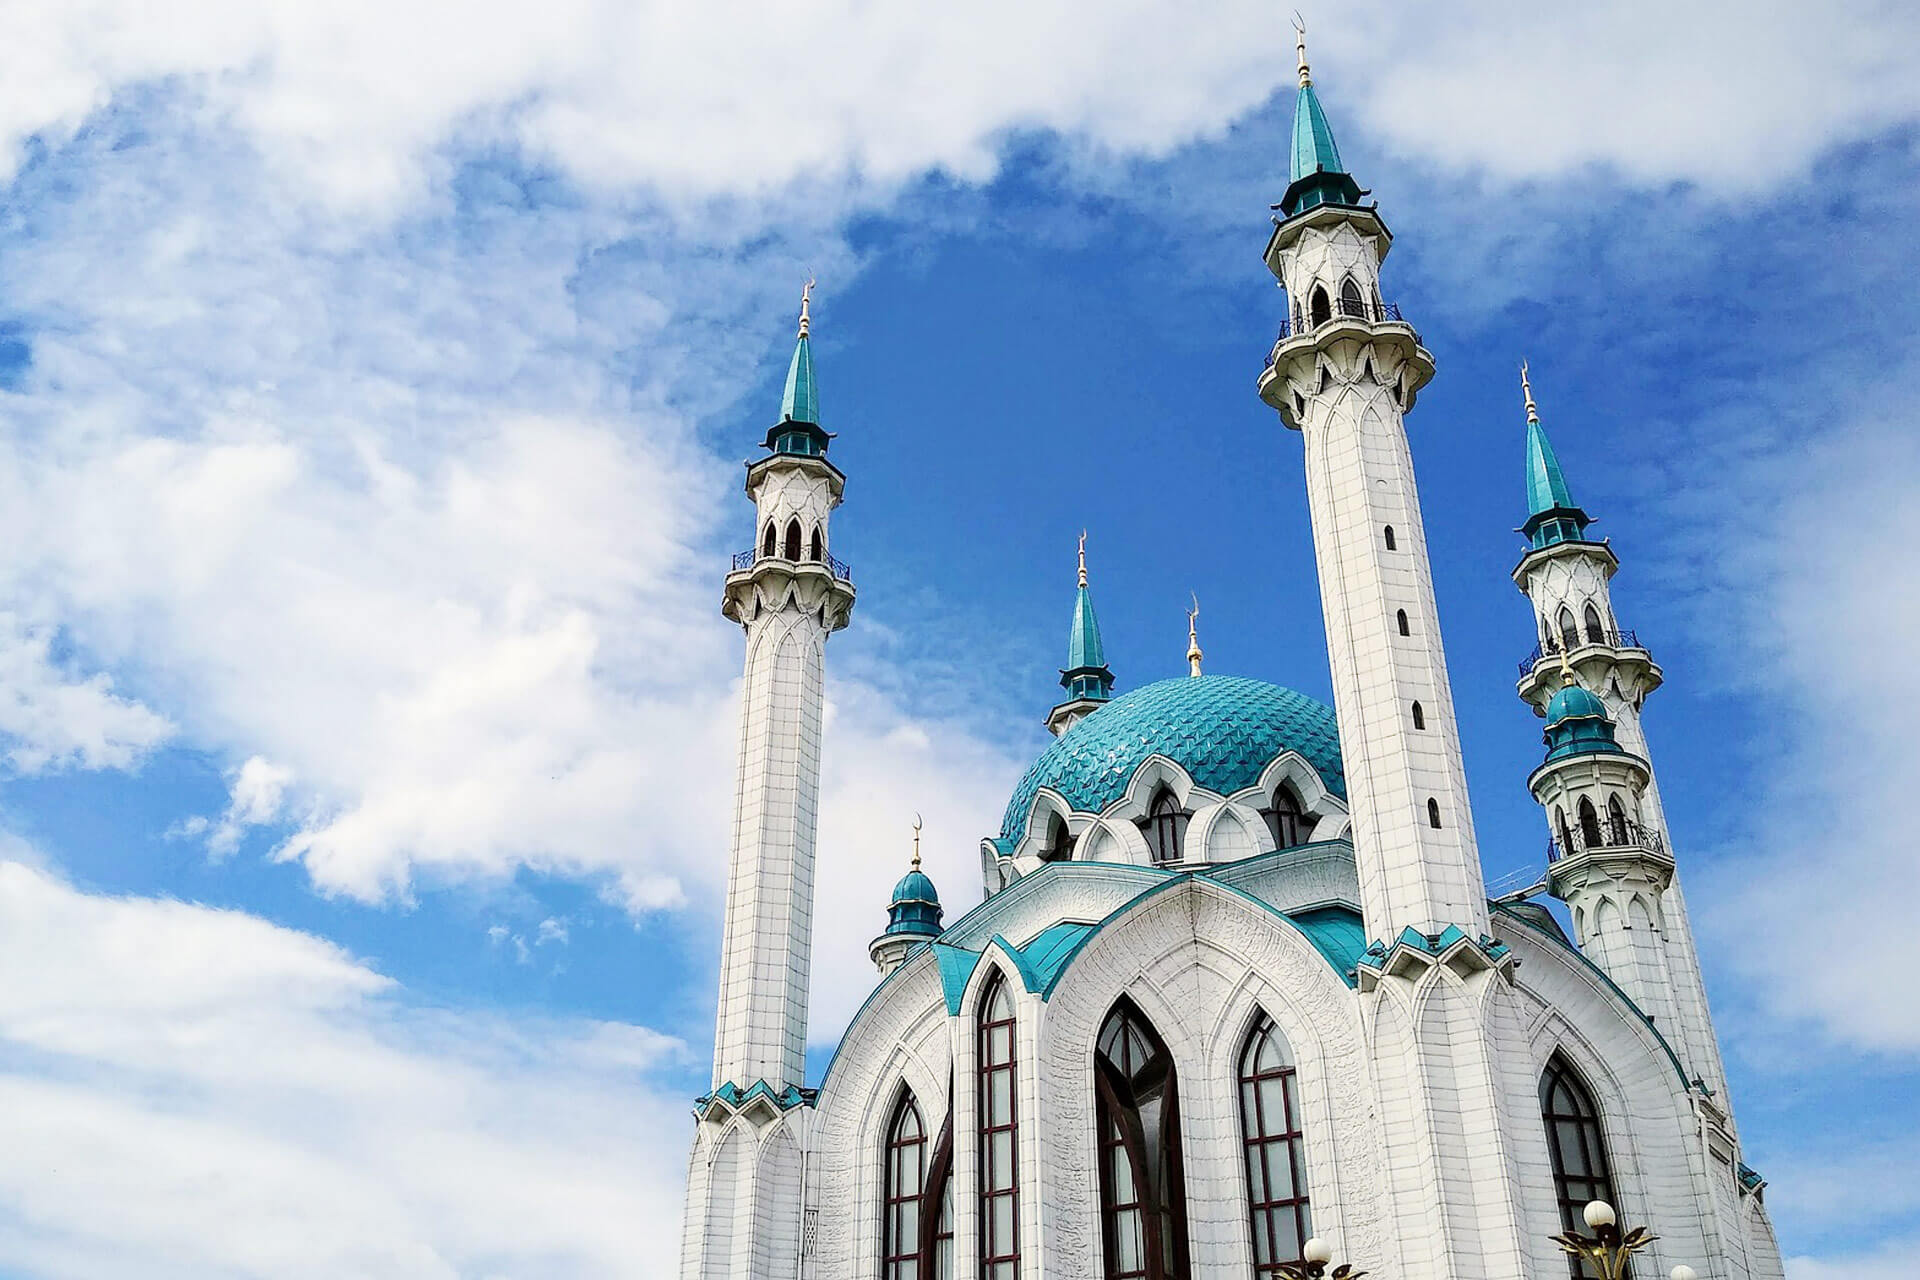 Kazan, White mosque with blue dome and minarets against the background of the blue sky with clouds.